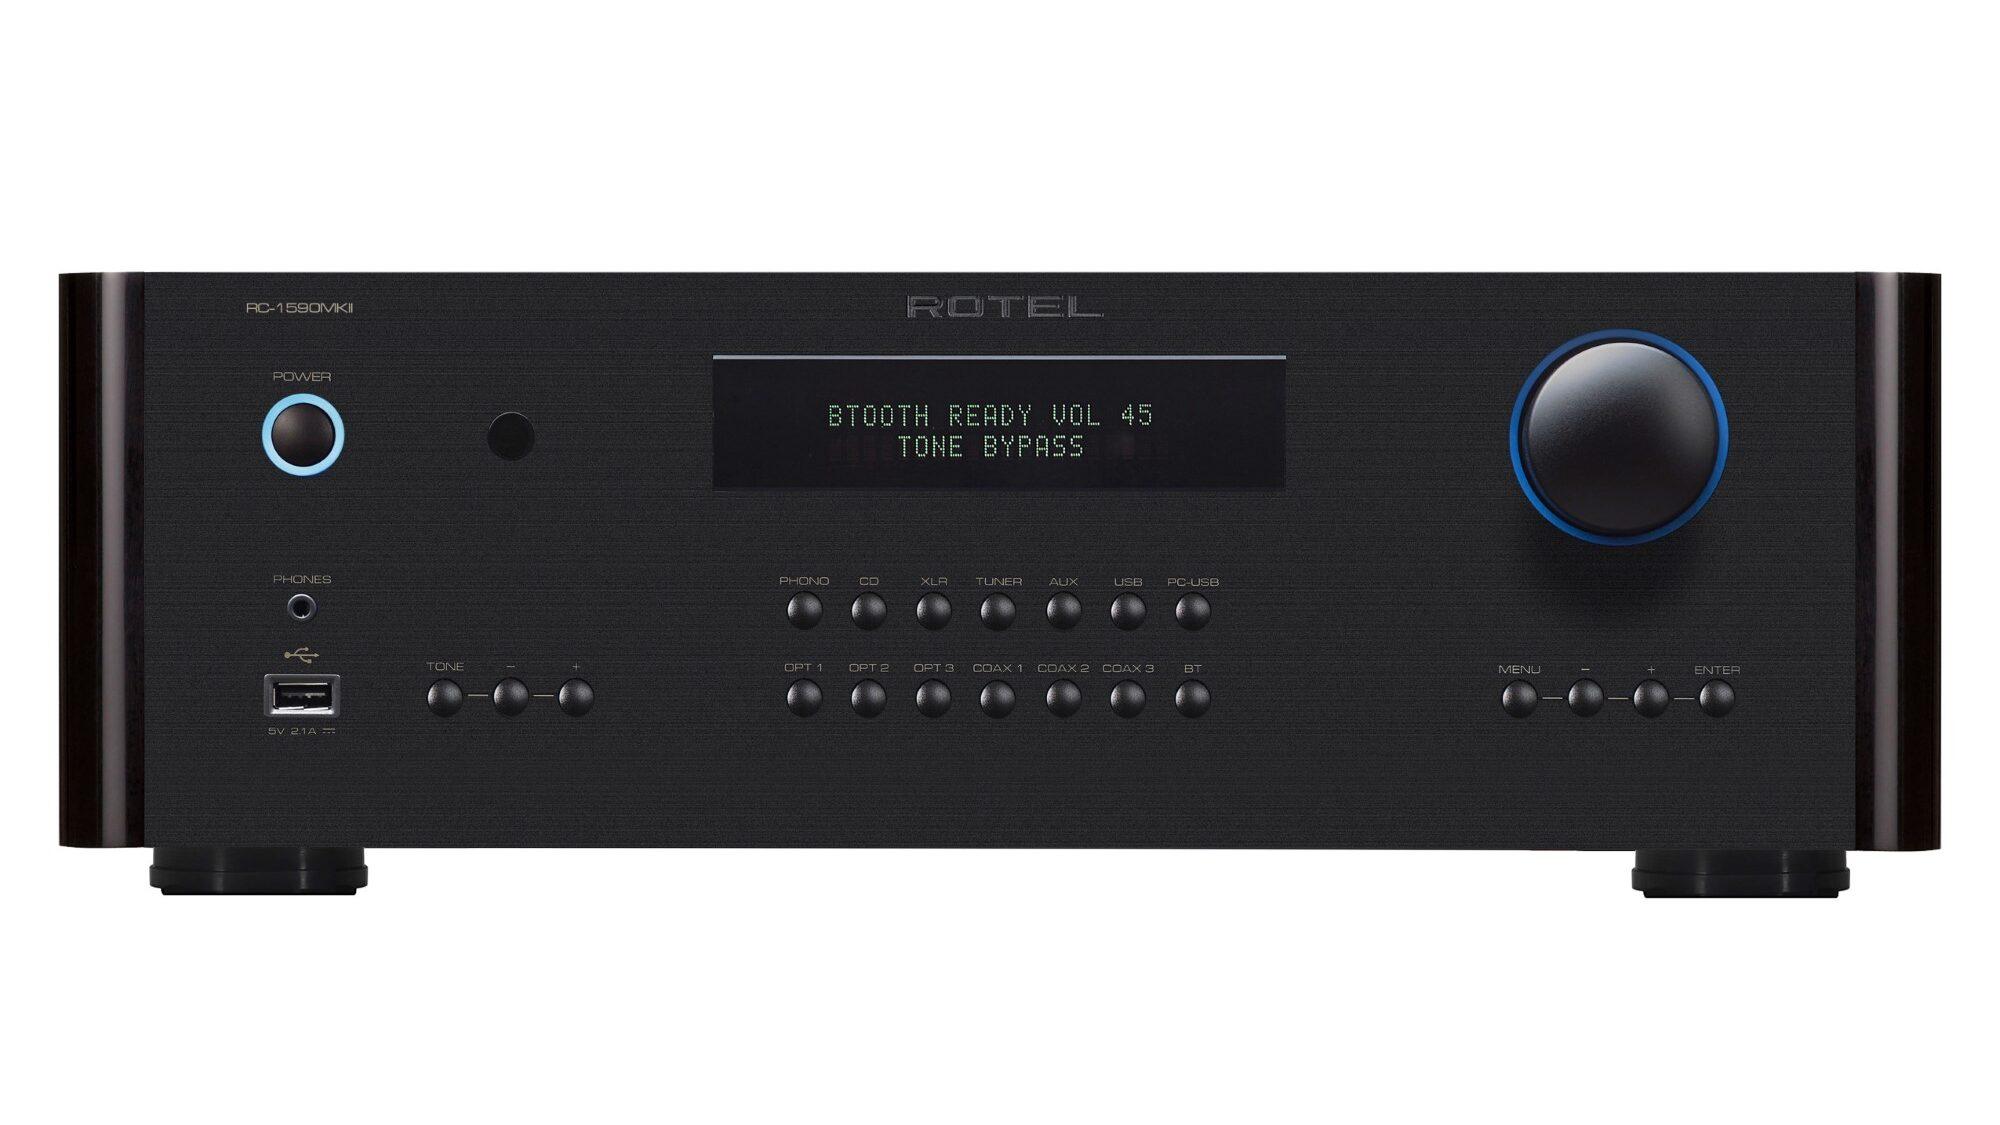 Rotel's latest pre-amplifiers are excellent performers jam-packed with inputs and solid engineering.